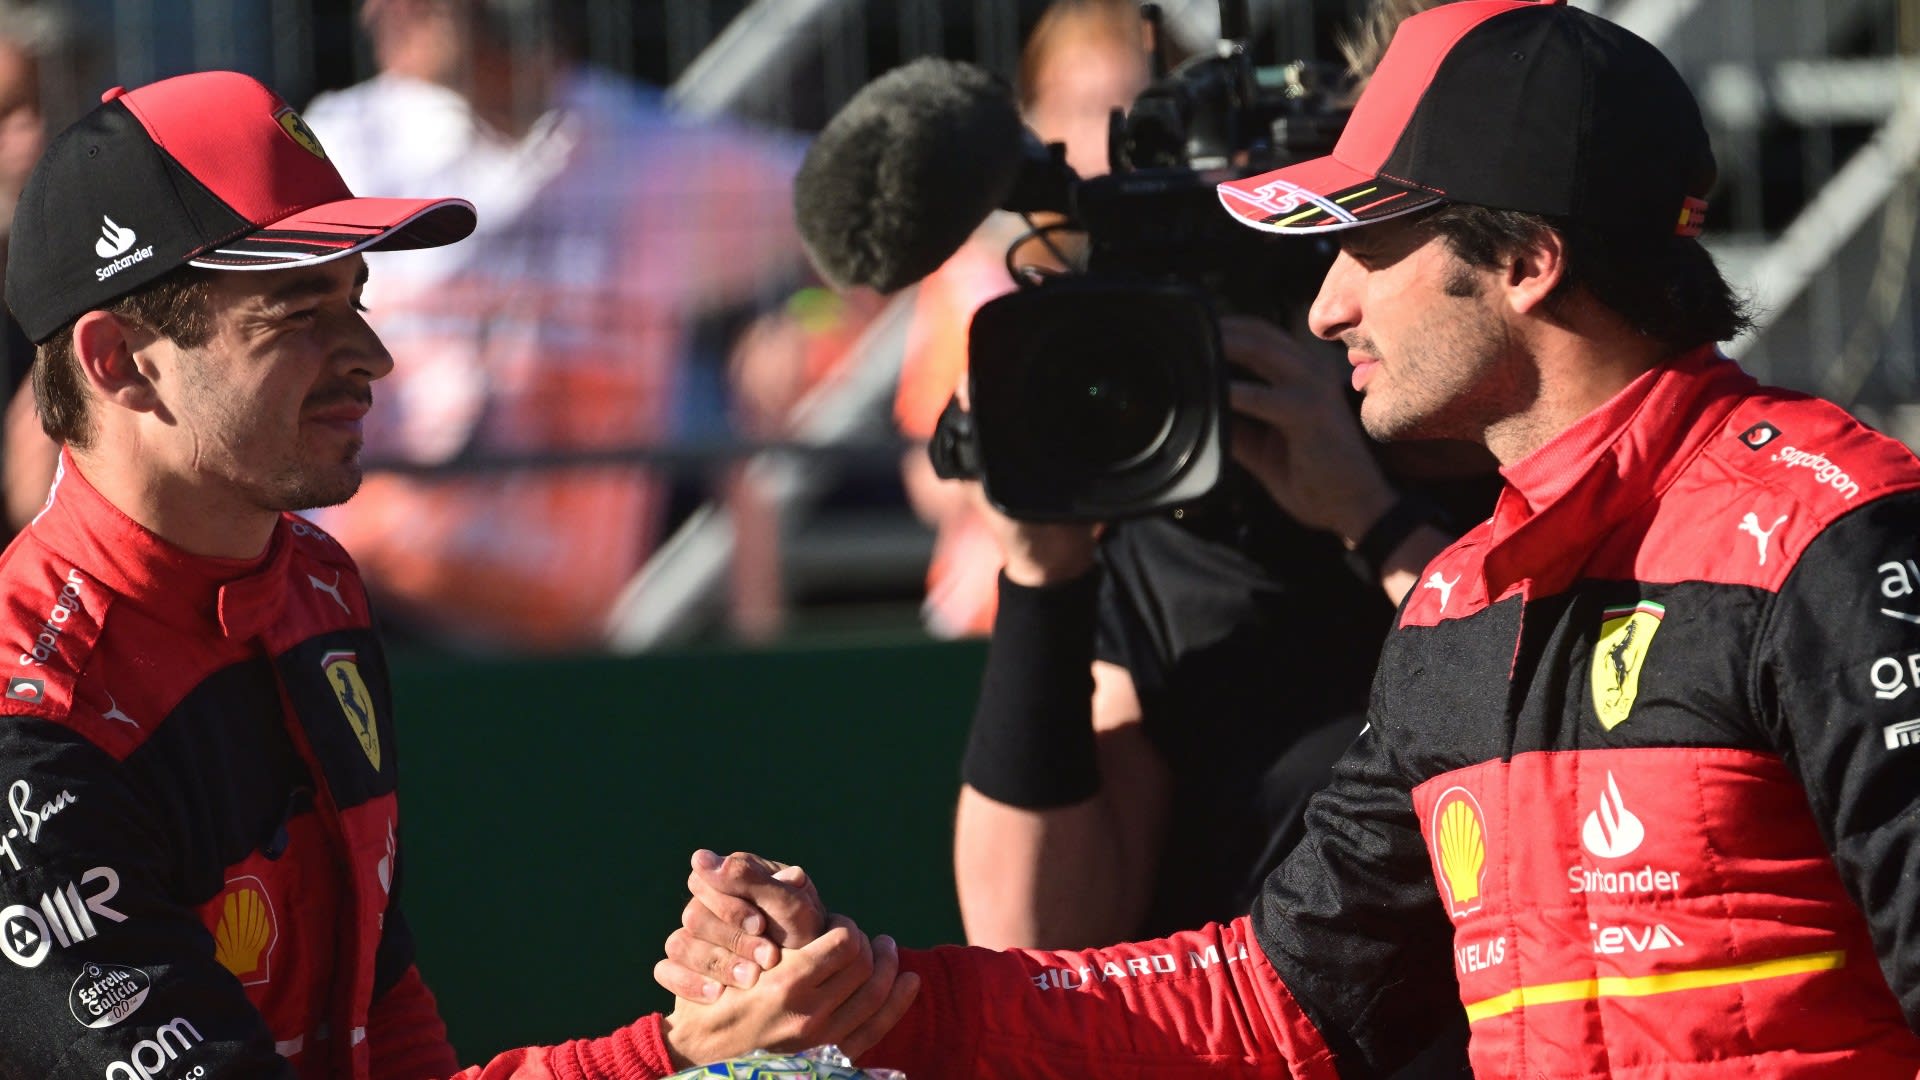 'There's everything to play for' say Ferrari drivers after claiming P2 ...